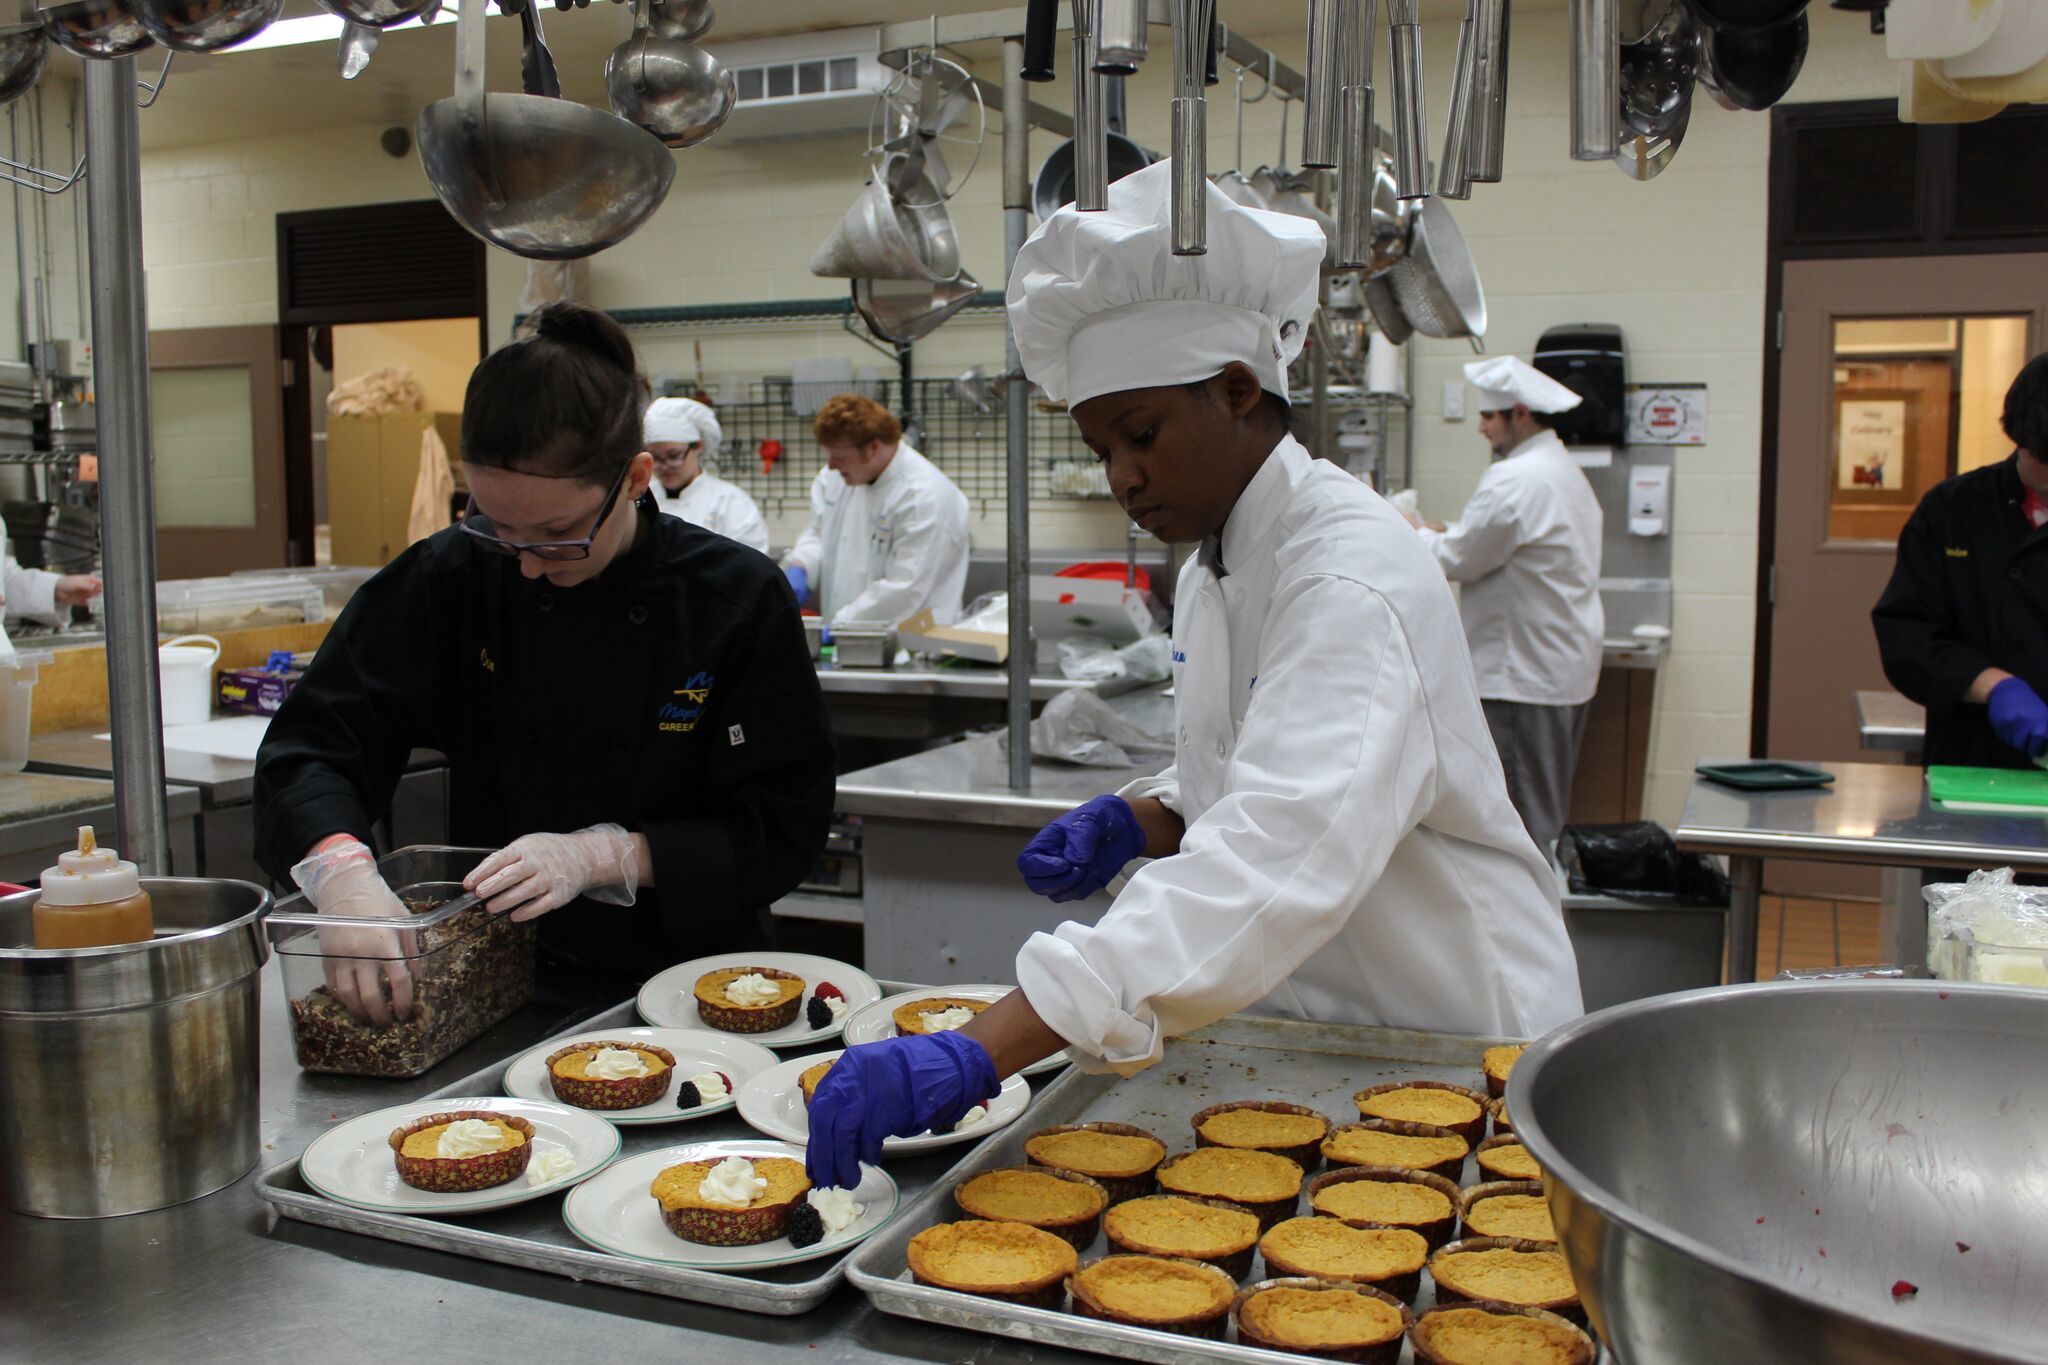 Culinary Arts students prepping desserts